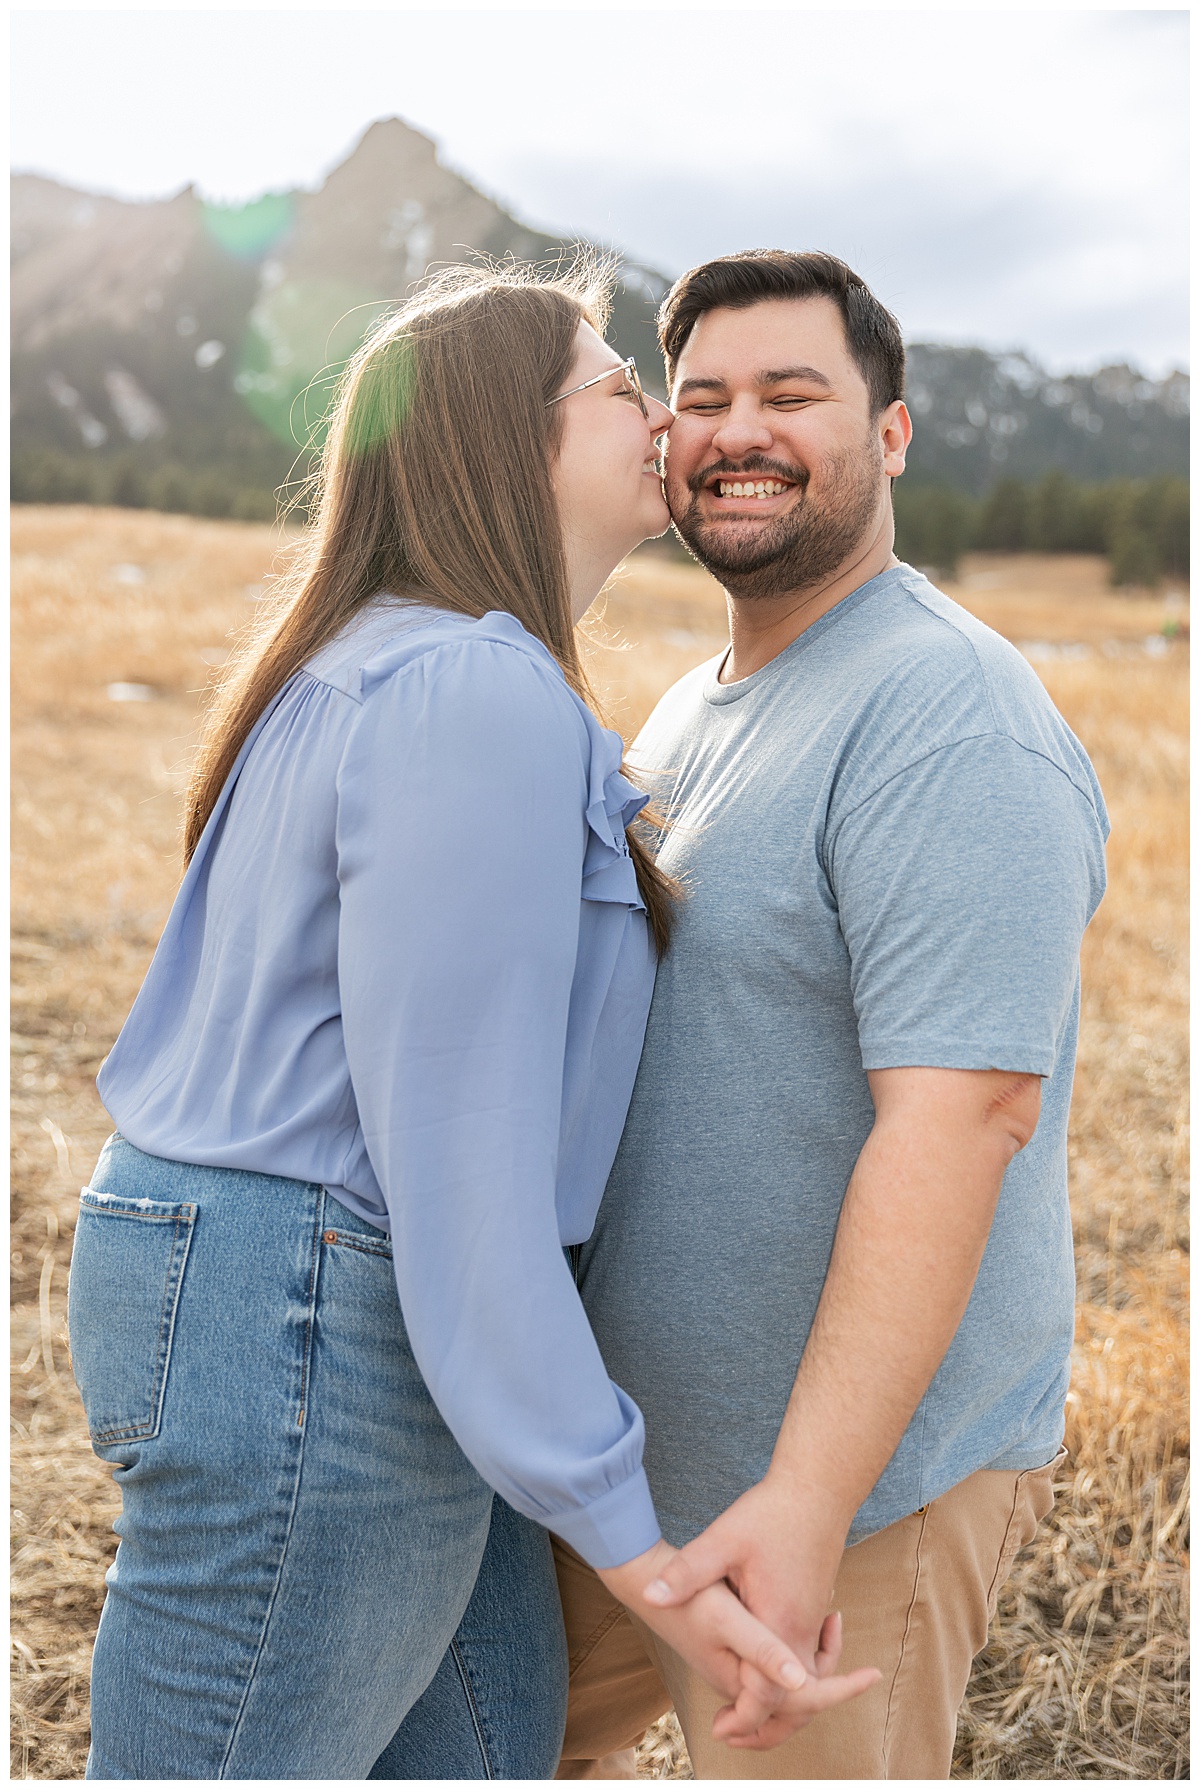 A couple poses in front of the Flatirons for their Boulder engagement session. They are both wearing blue; the man has dark brown hair and a beard, the woman has long brown hair and glasses.